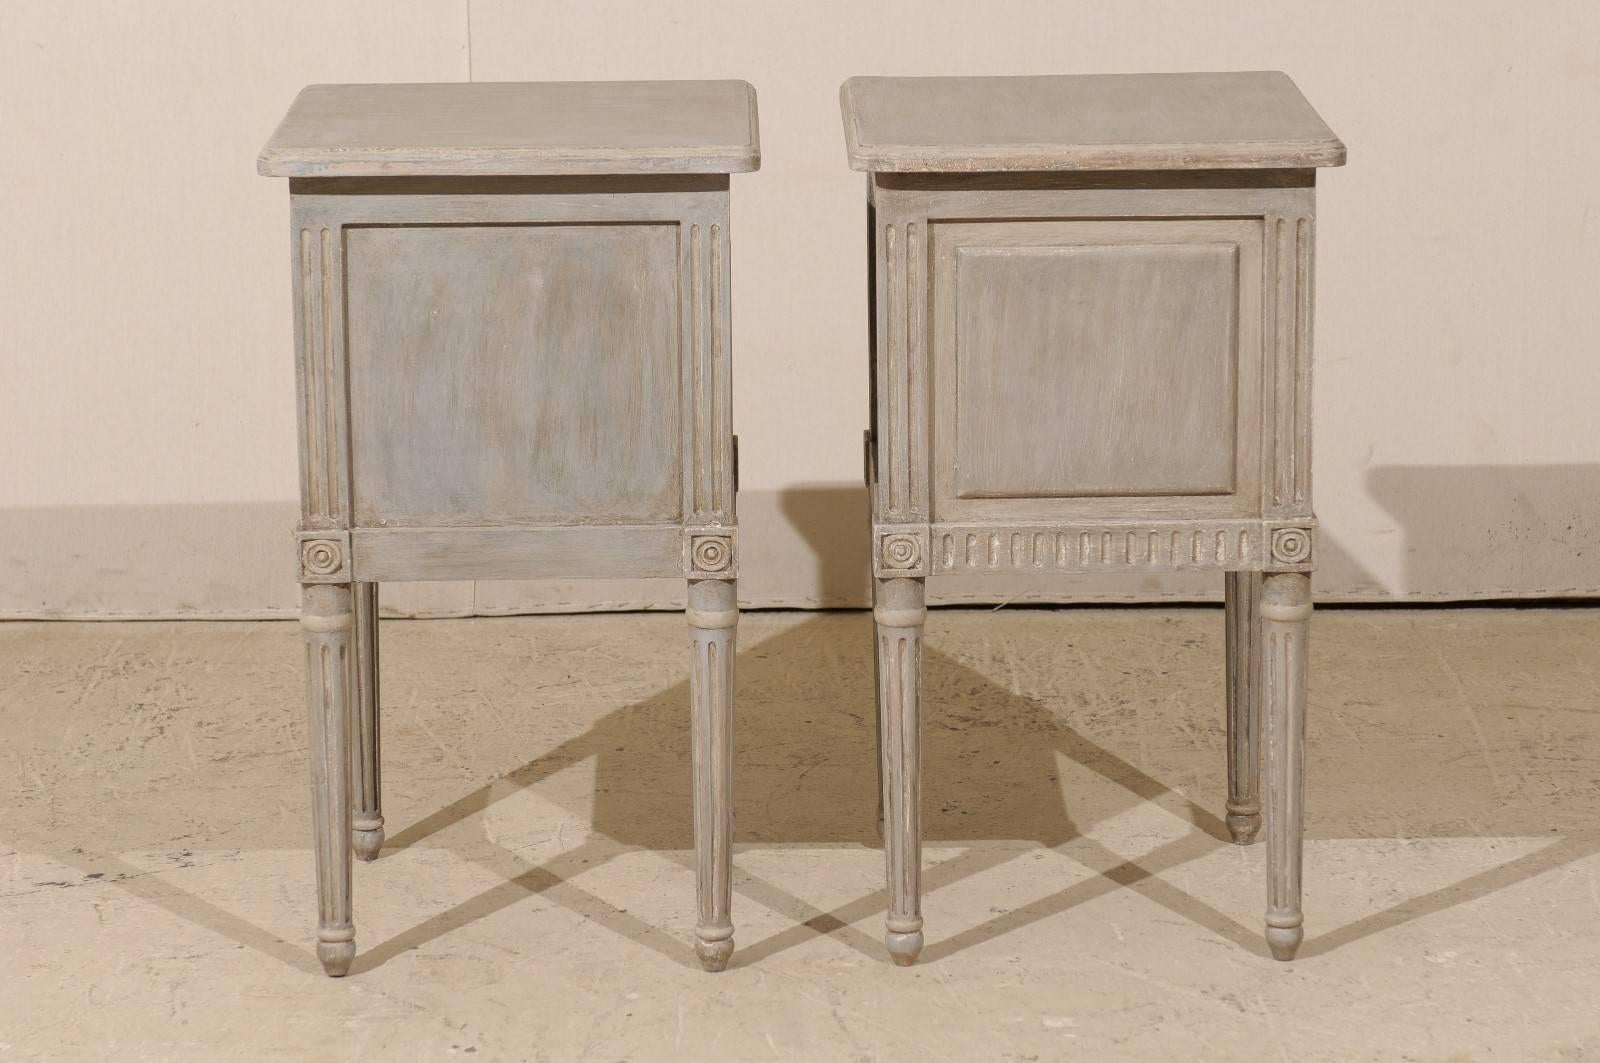 Pair of Small Sized Two-Drawer Painted Wood Nightstand Tables in Neutral Grey 1